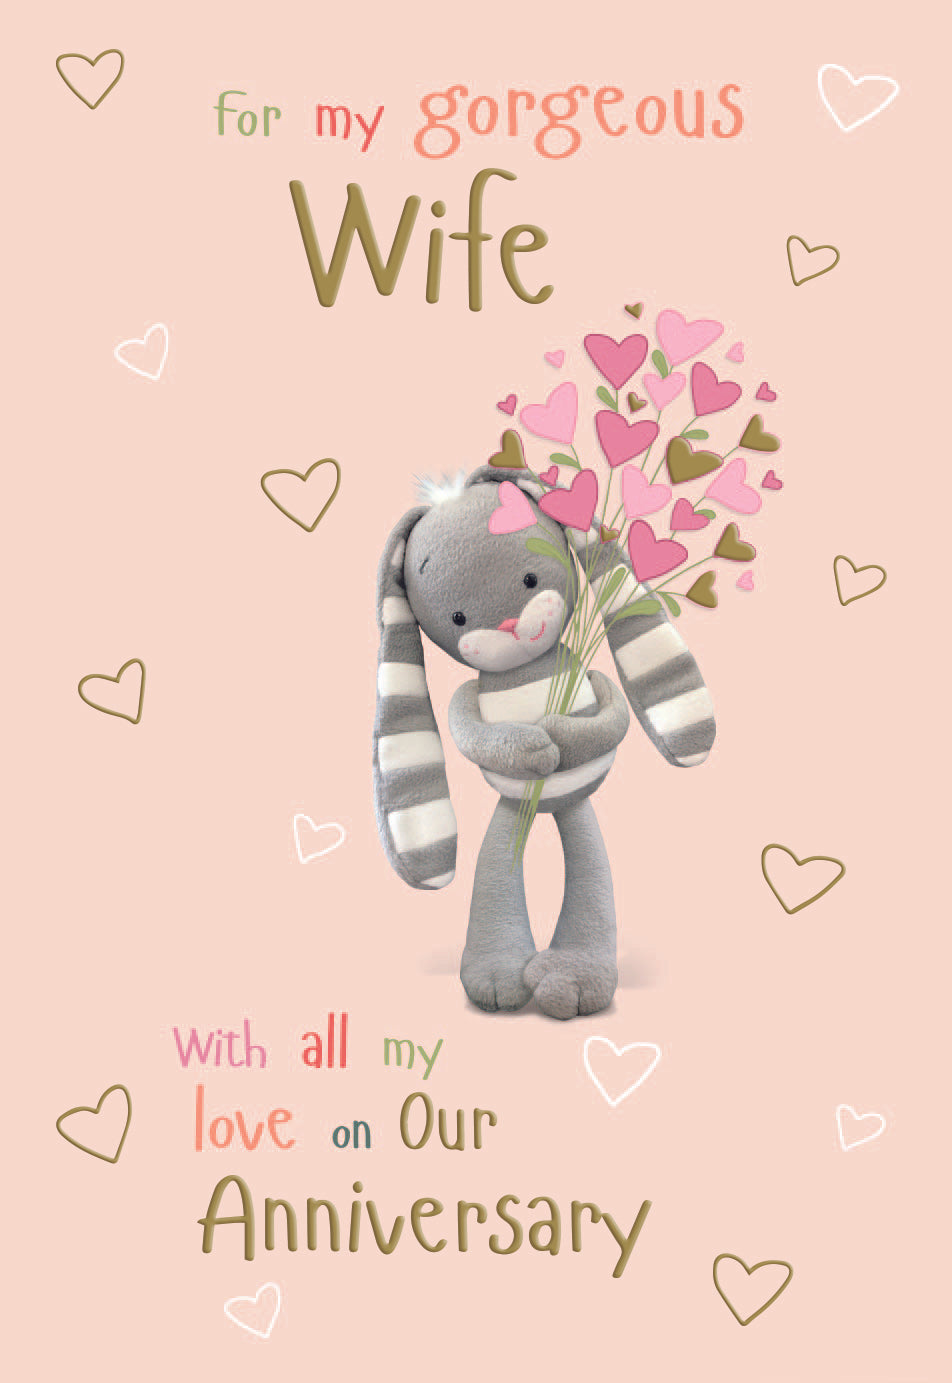 Wife wedding anniversary card- cute rabbit with heart flowers